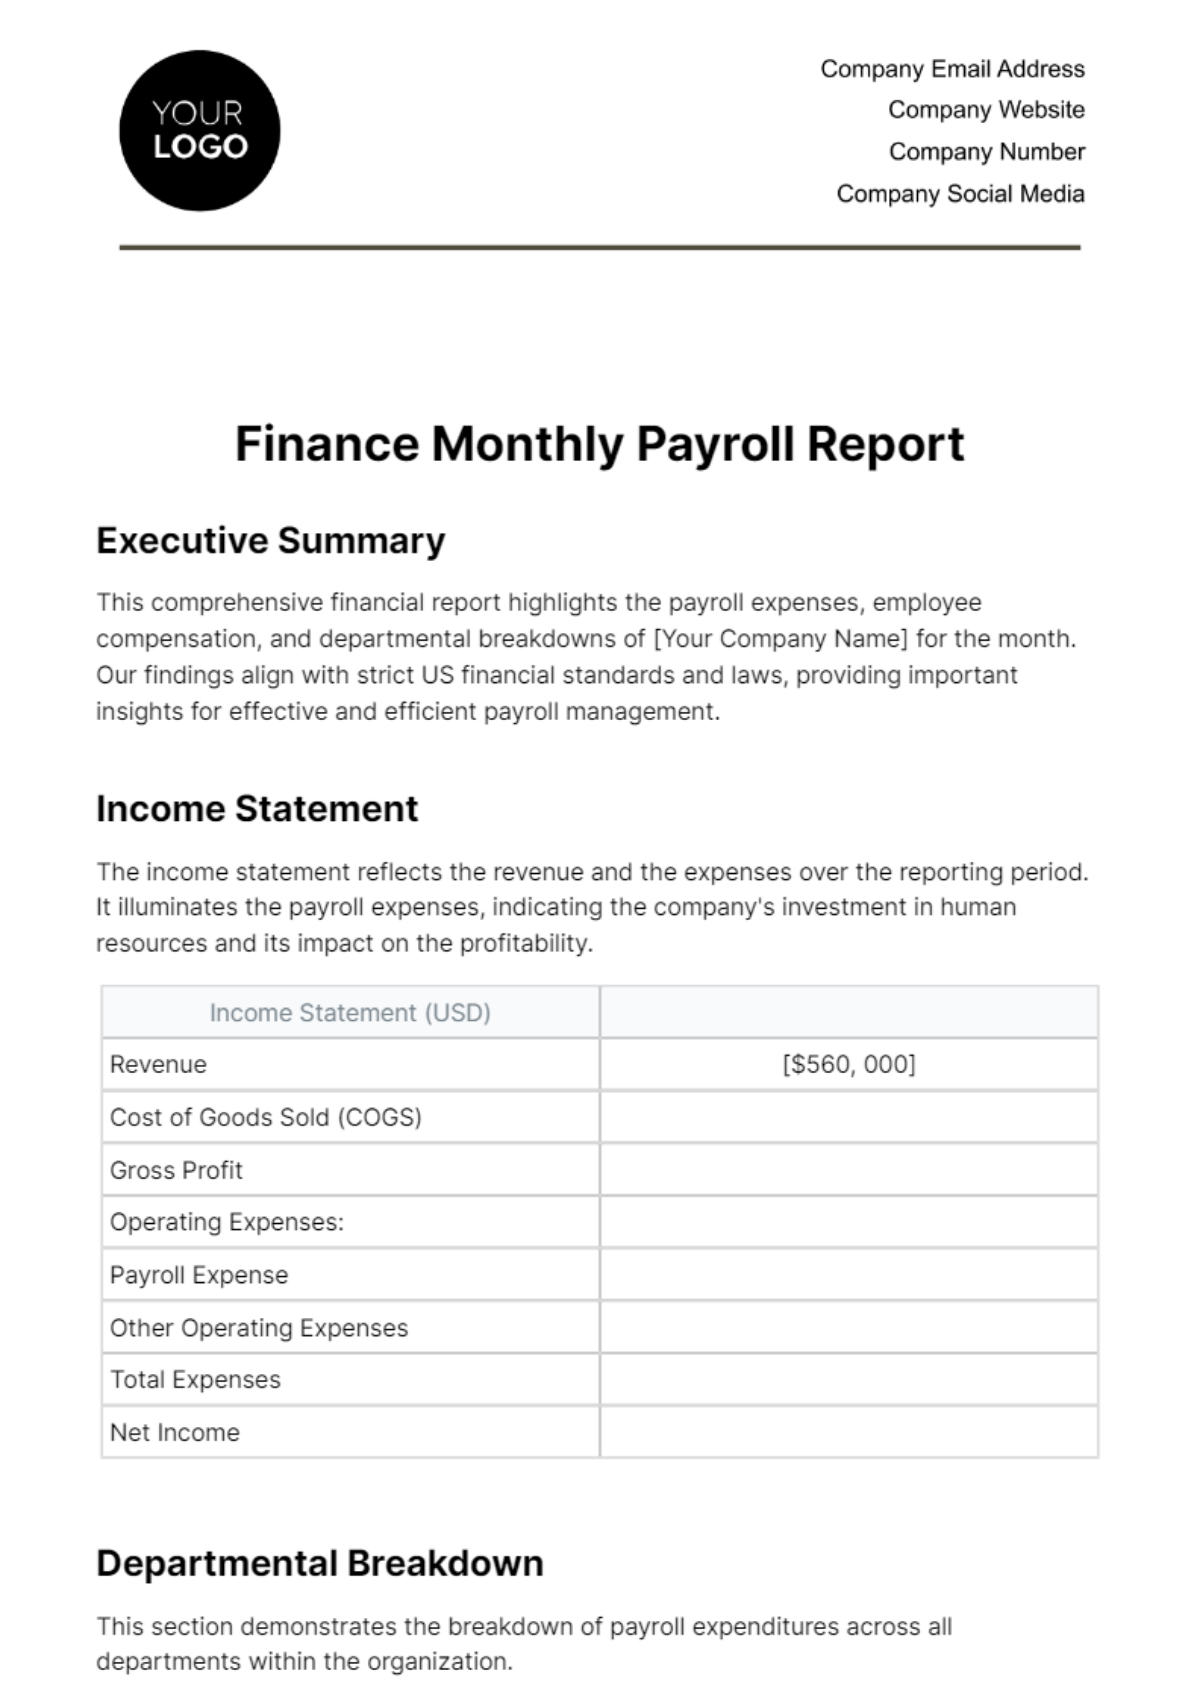 Free Finance Monthly Payroll Report Template